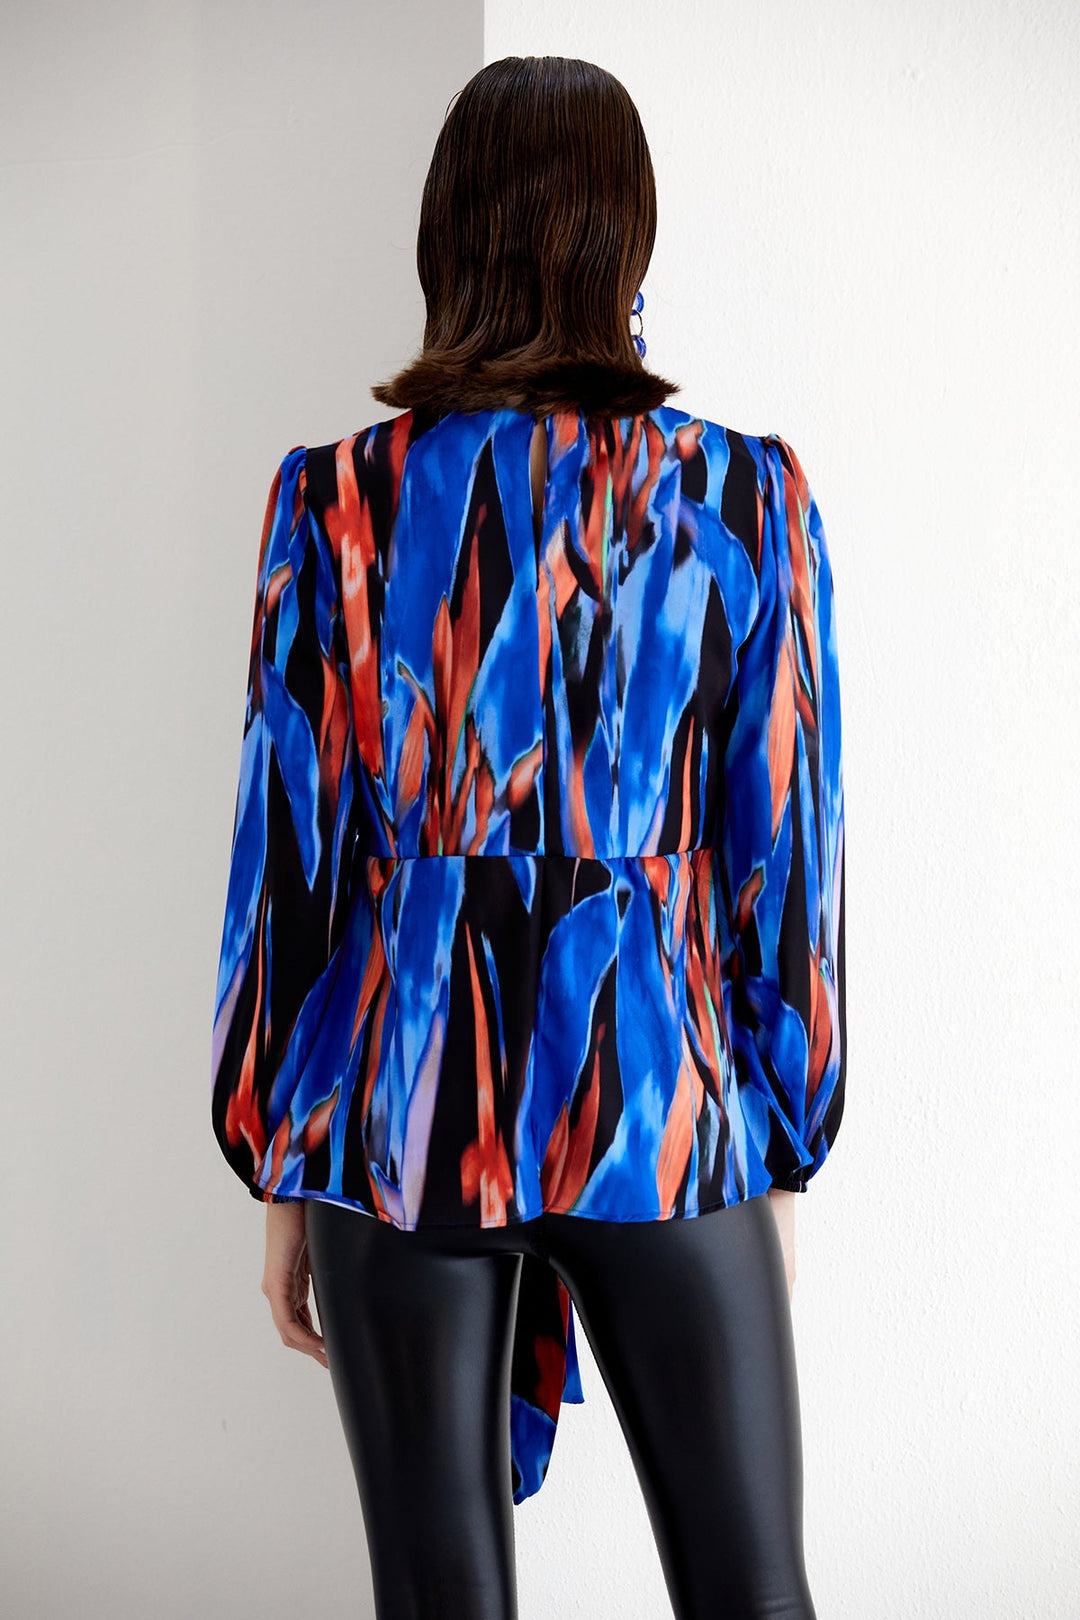 Long Sleeve Wrap Knot Top in Blue Orange Abstract print